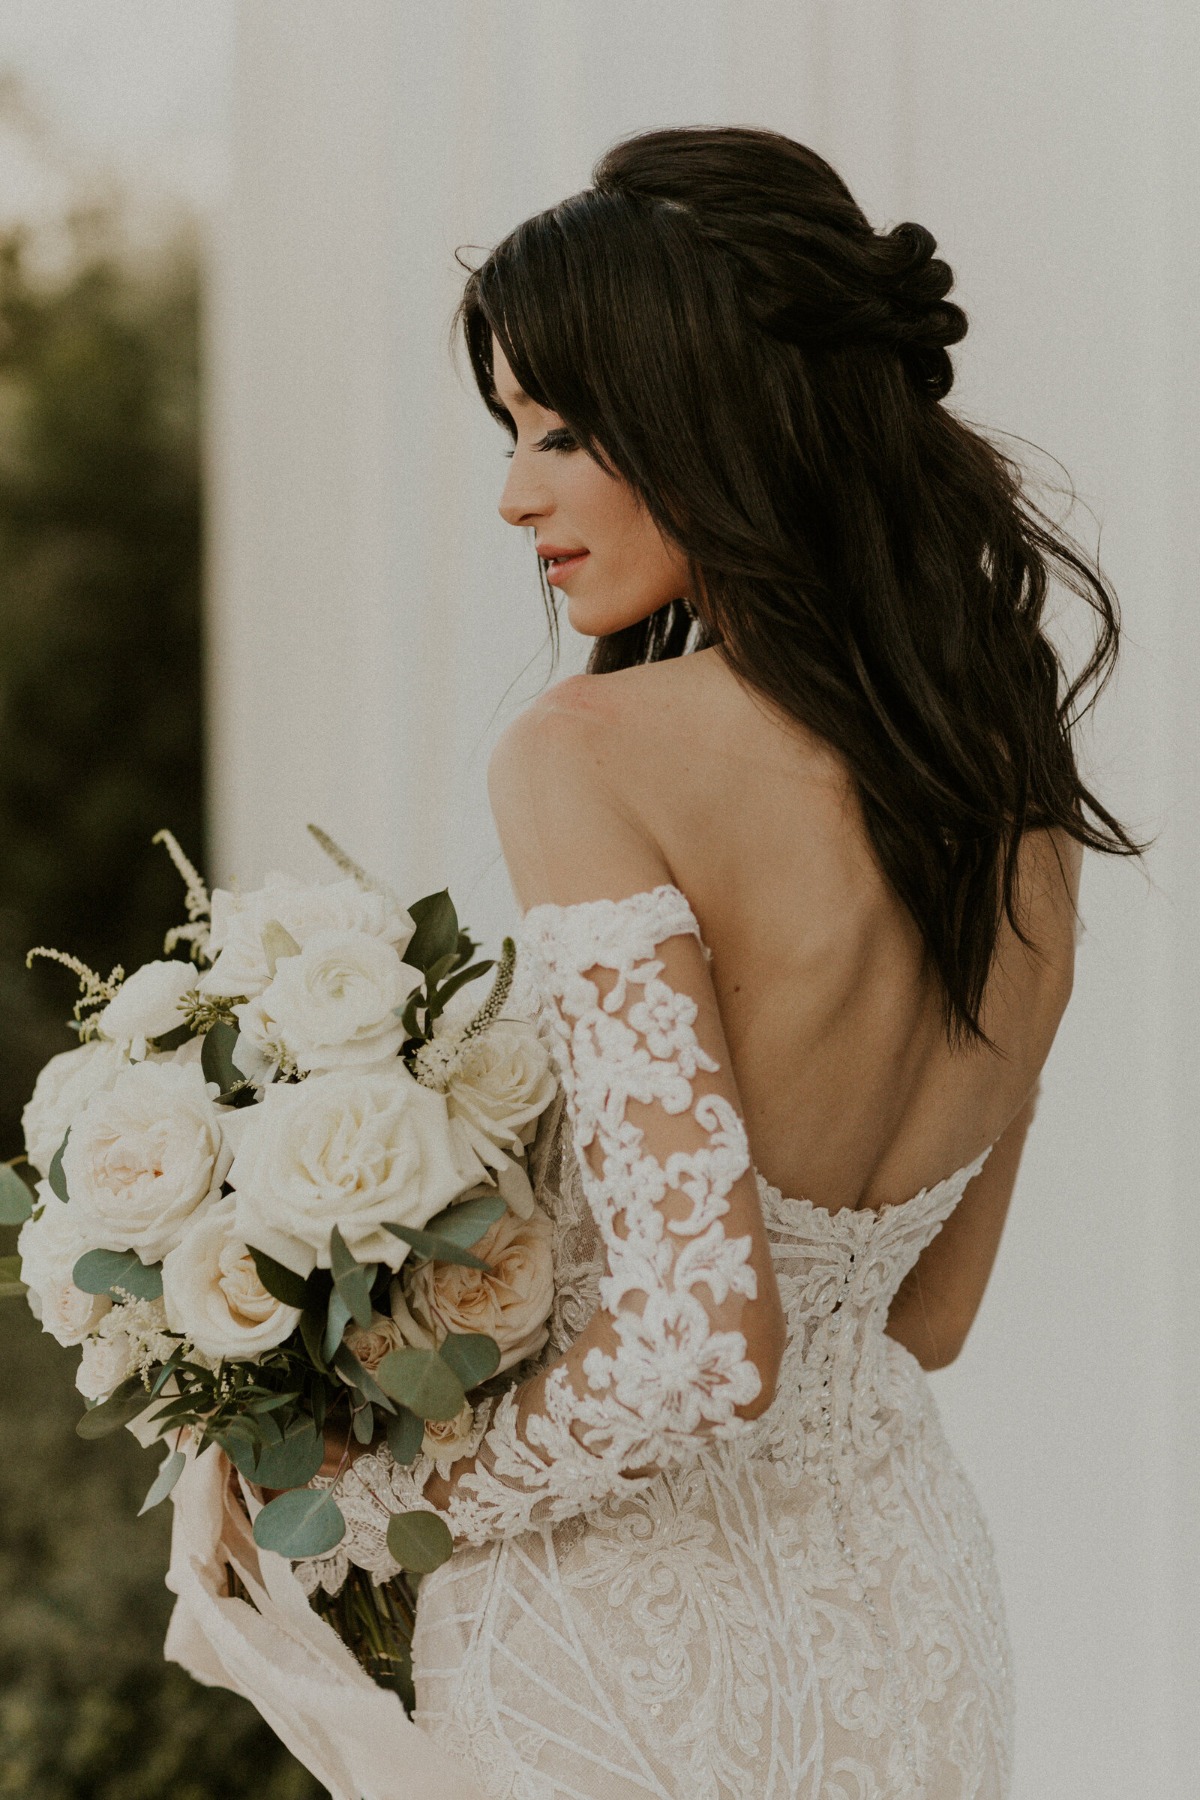 Portrait of bride facing away from camera holding bouquet